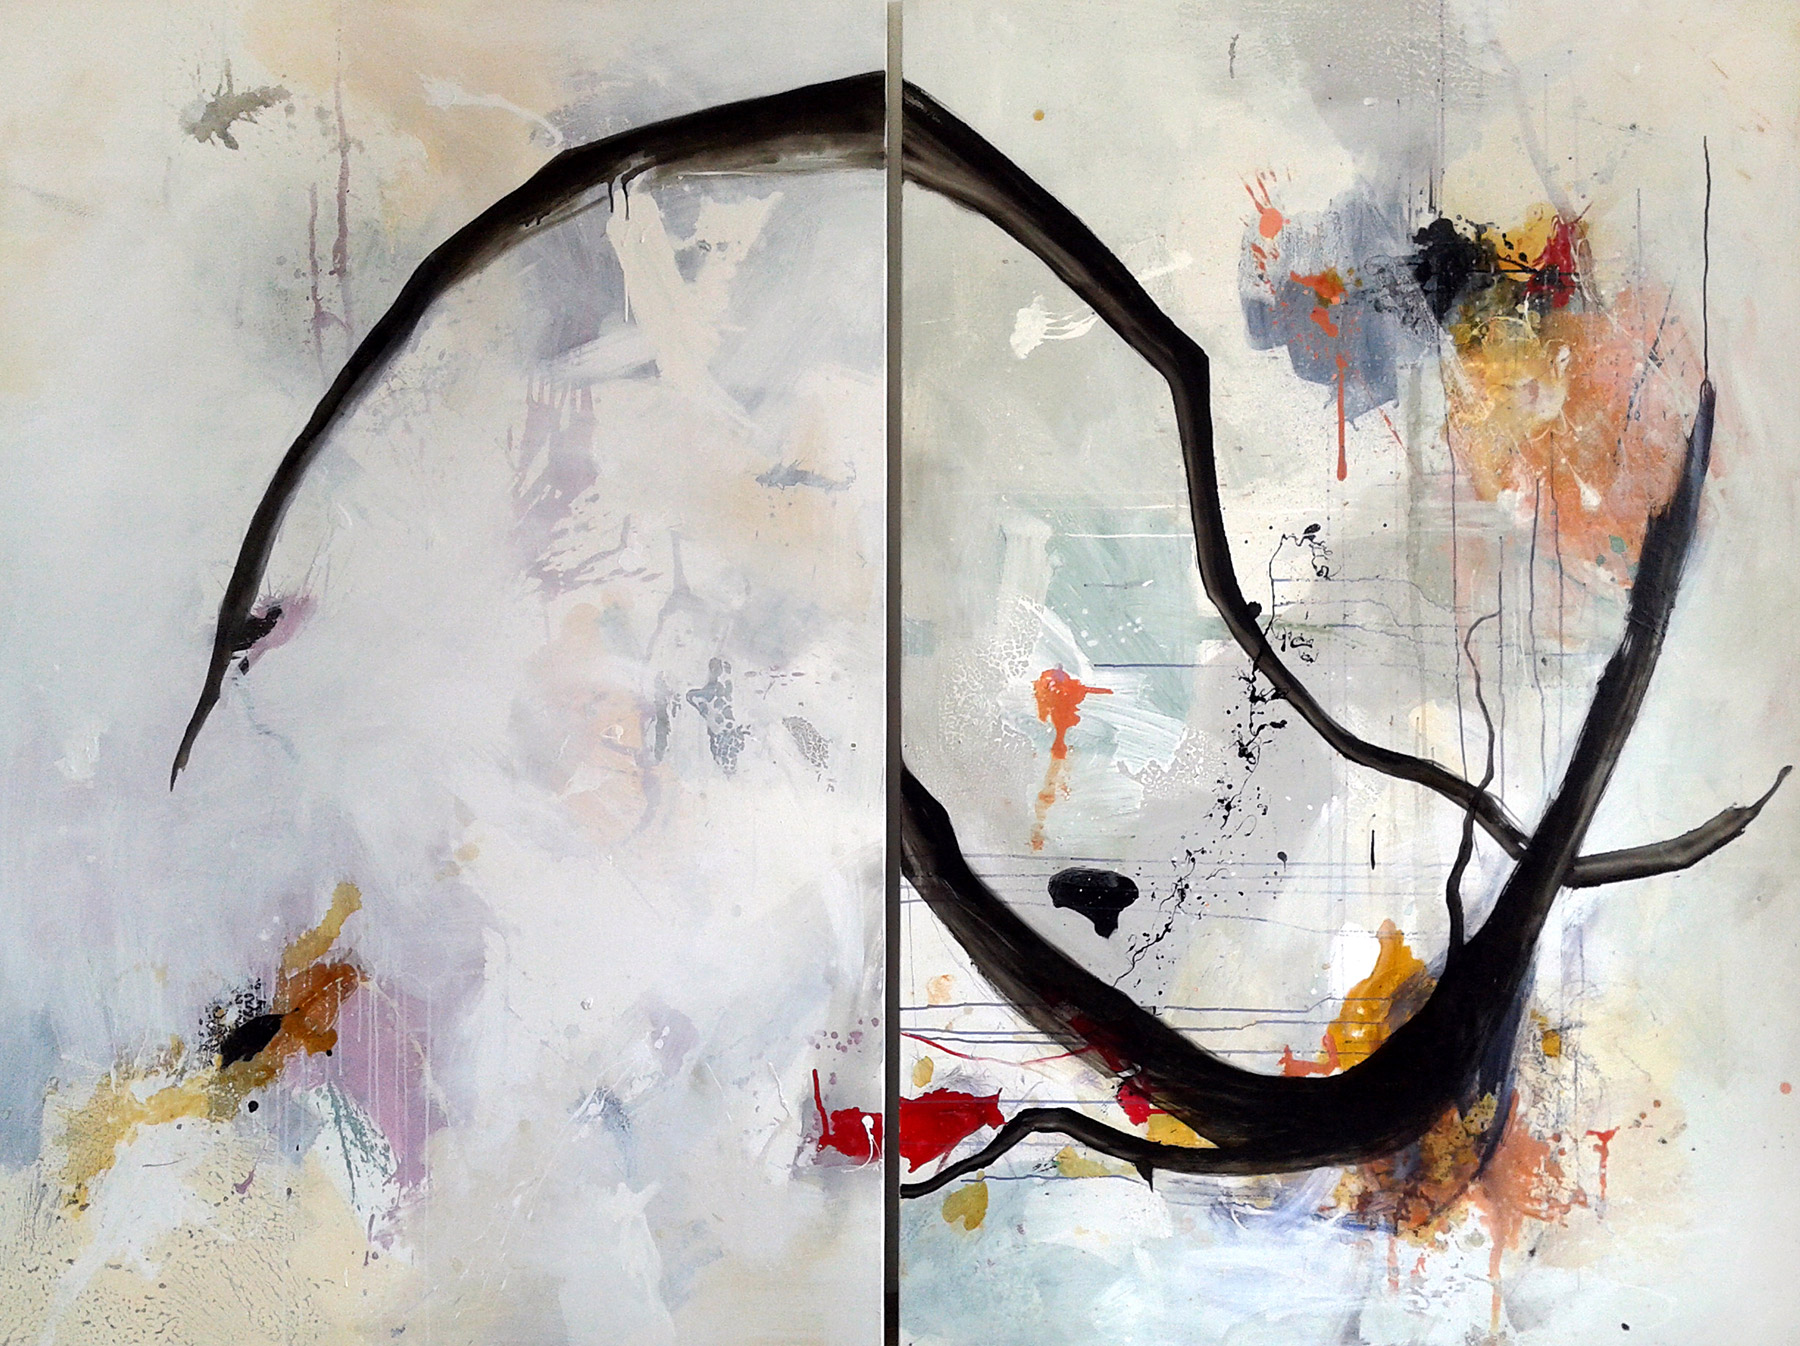 Untitled #46 (diptych) 195x260cm Mixed technique on canvas, 2015